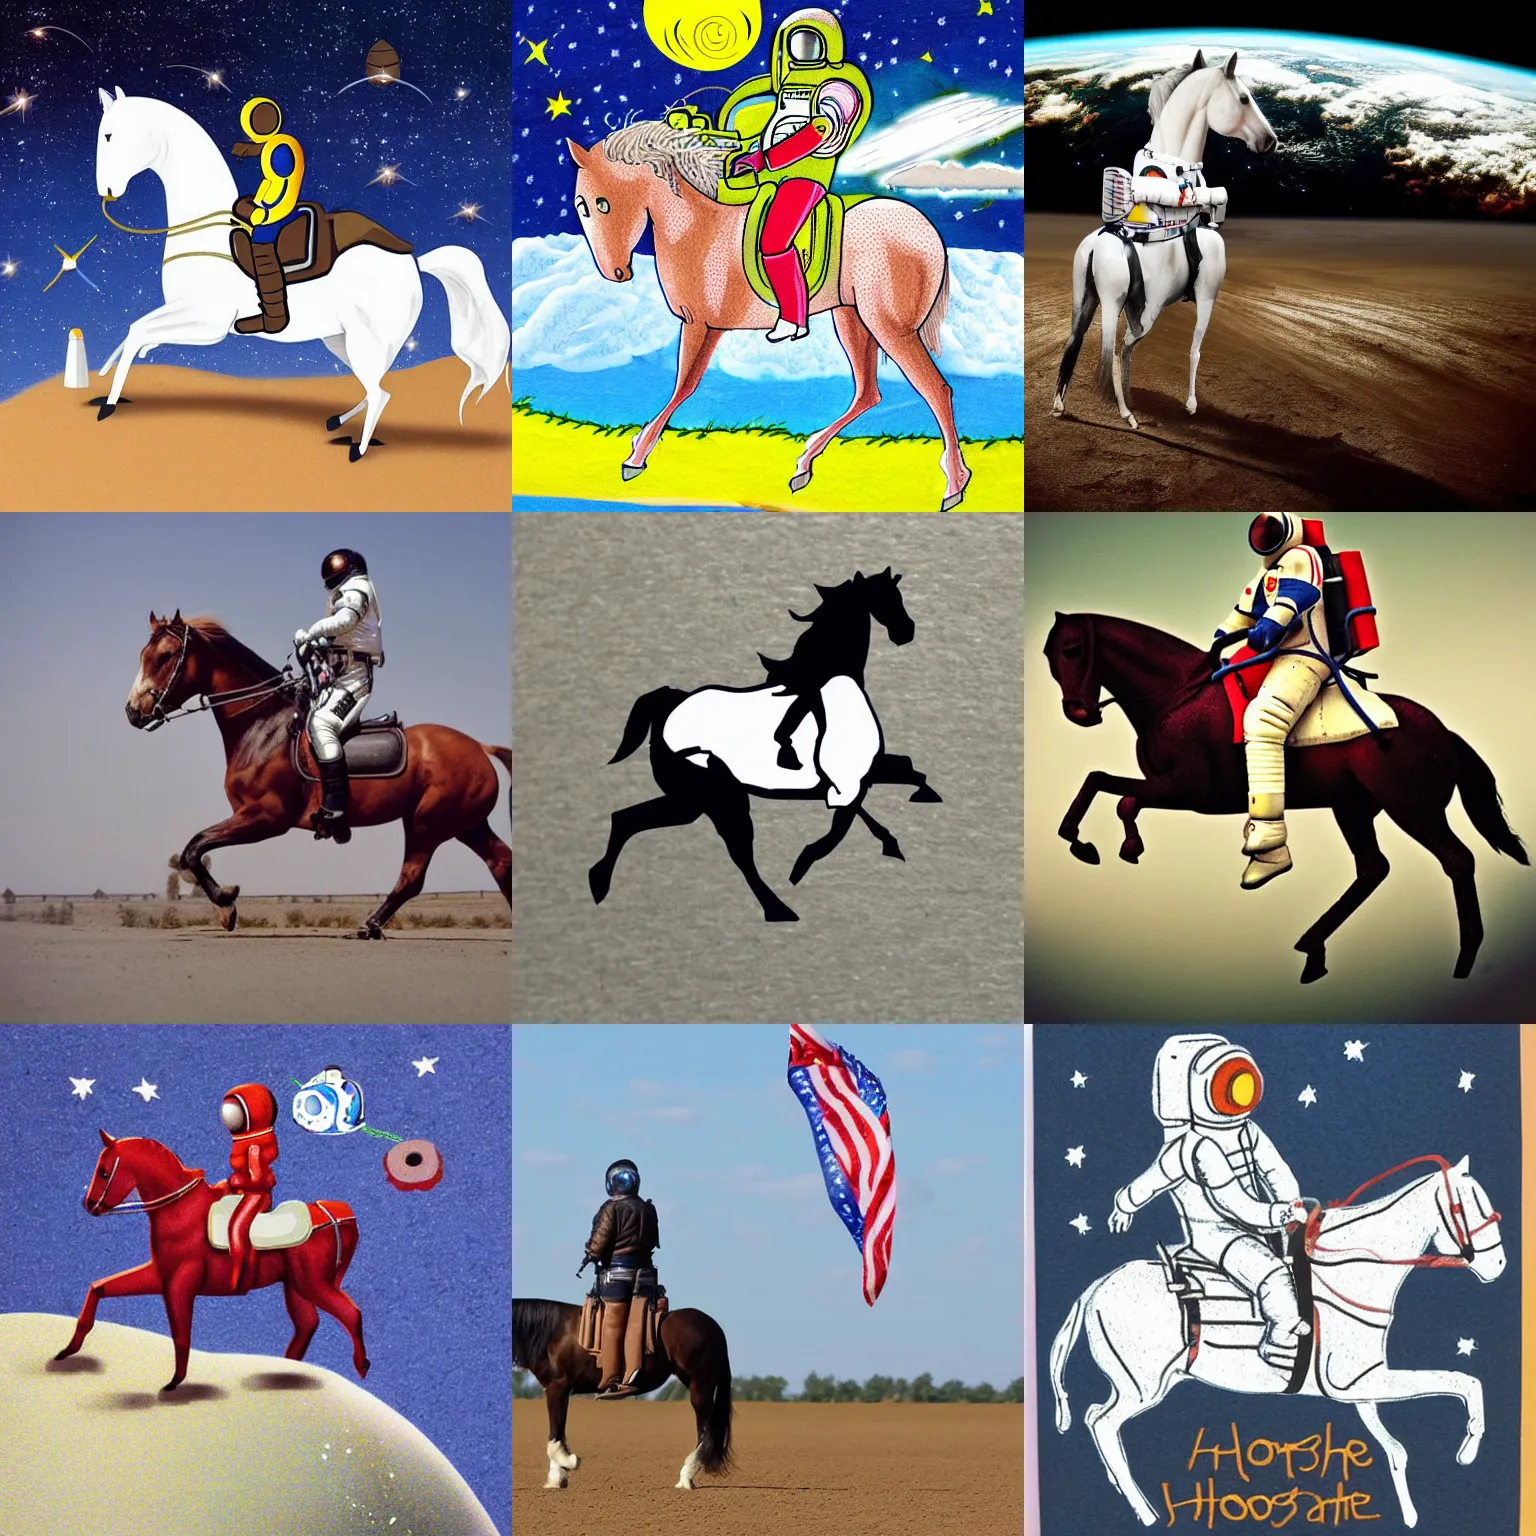 Prompt: a horse - astronaut riding on back of an horse - astronaut